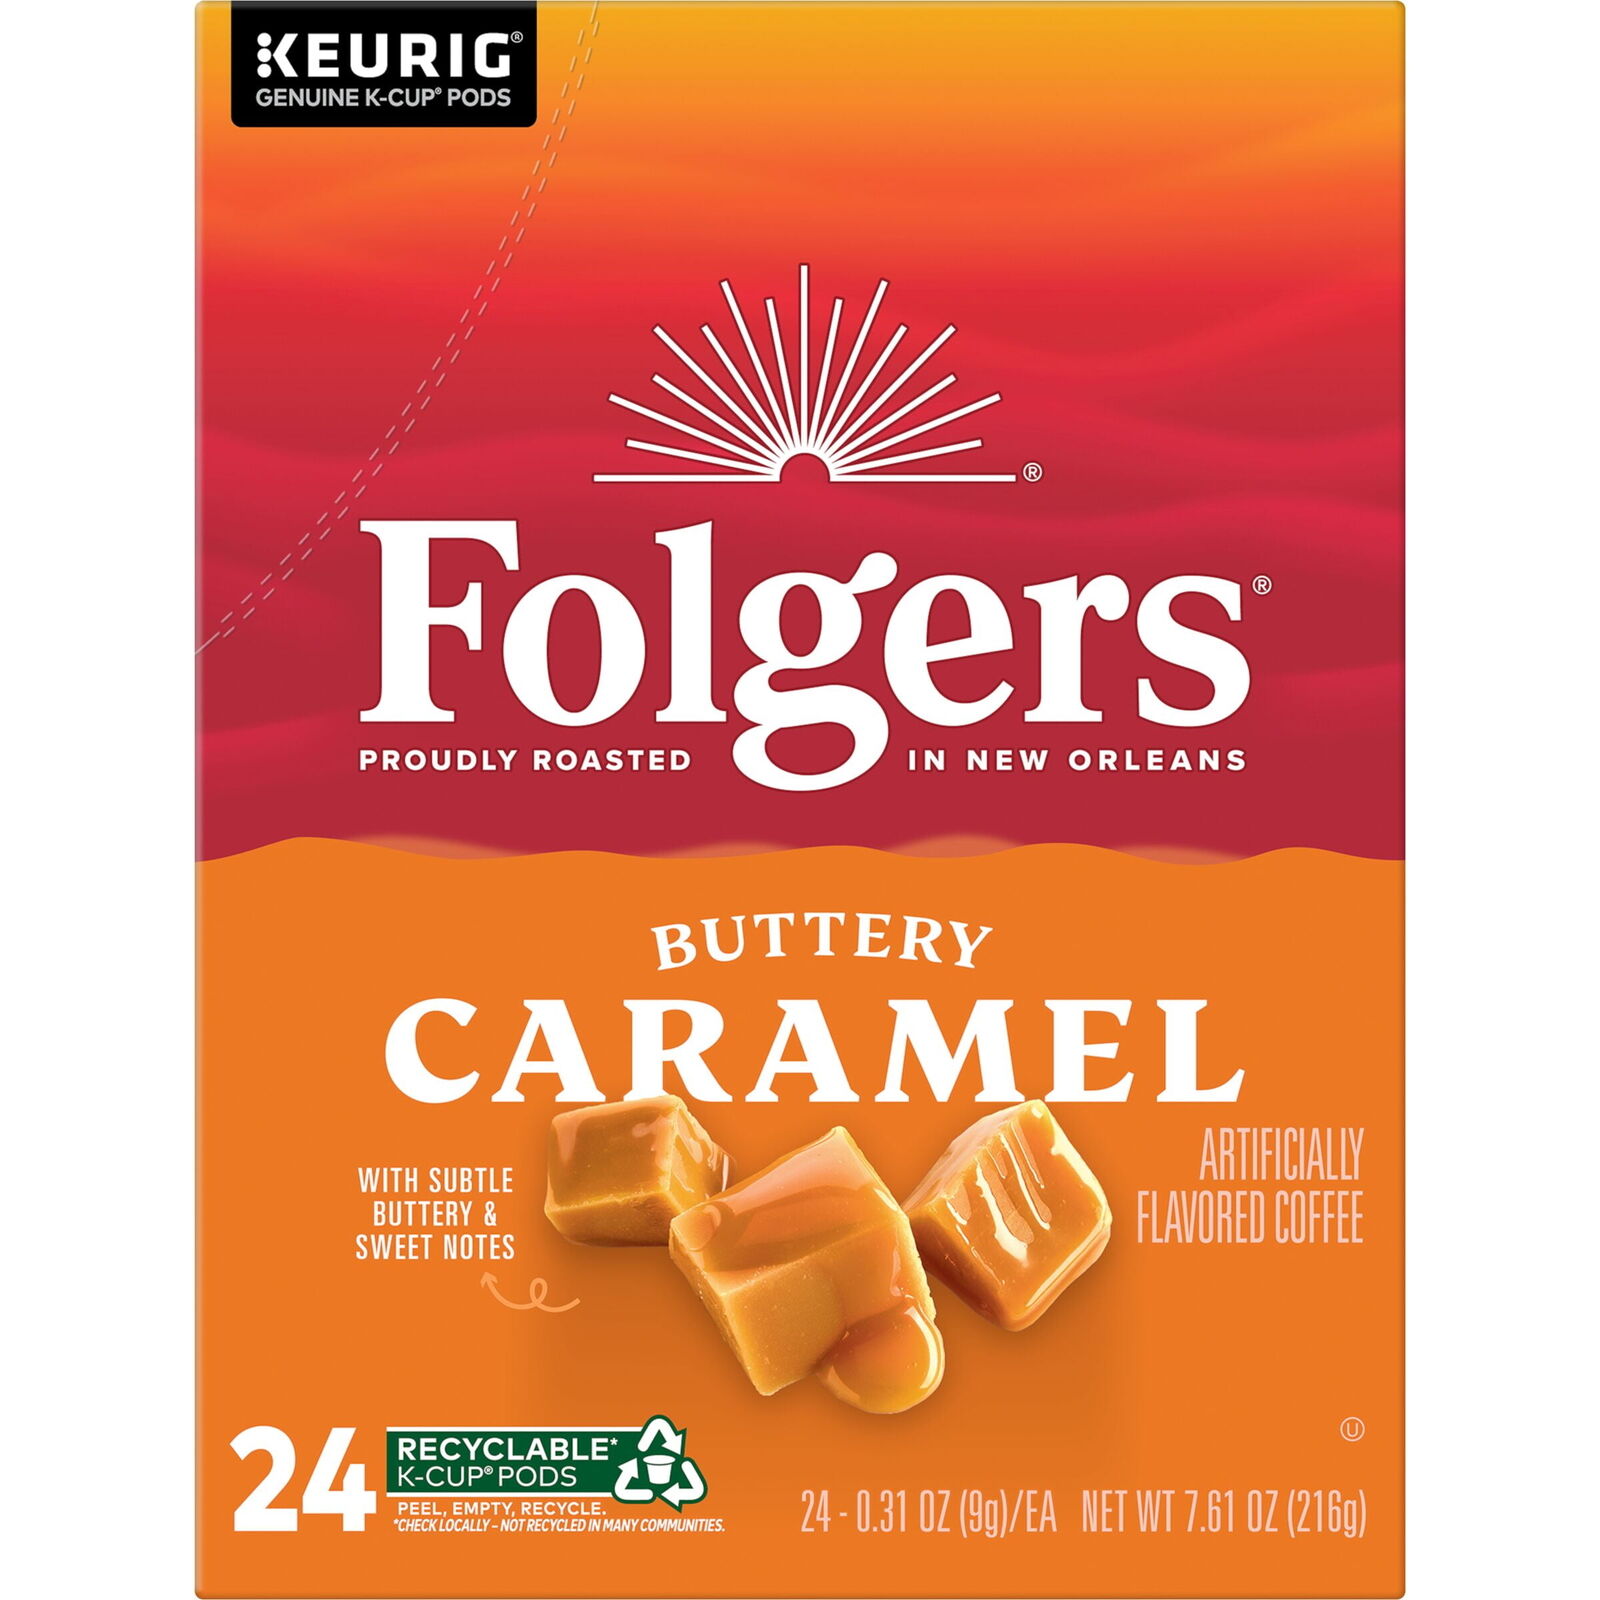 Folgers Buttery Caramel Artificially Flavored Coffee, Keurig K-Cup Pods